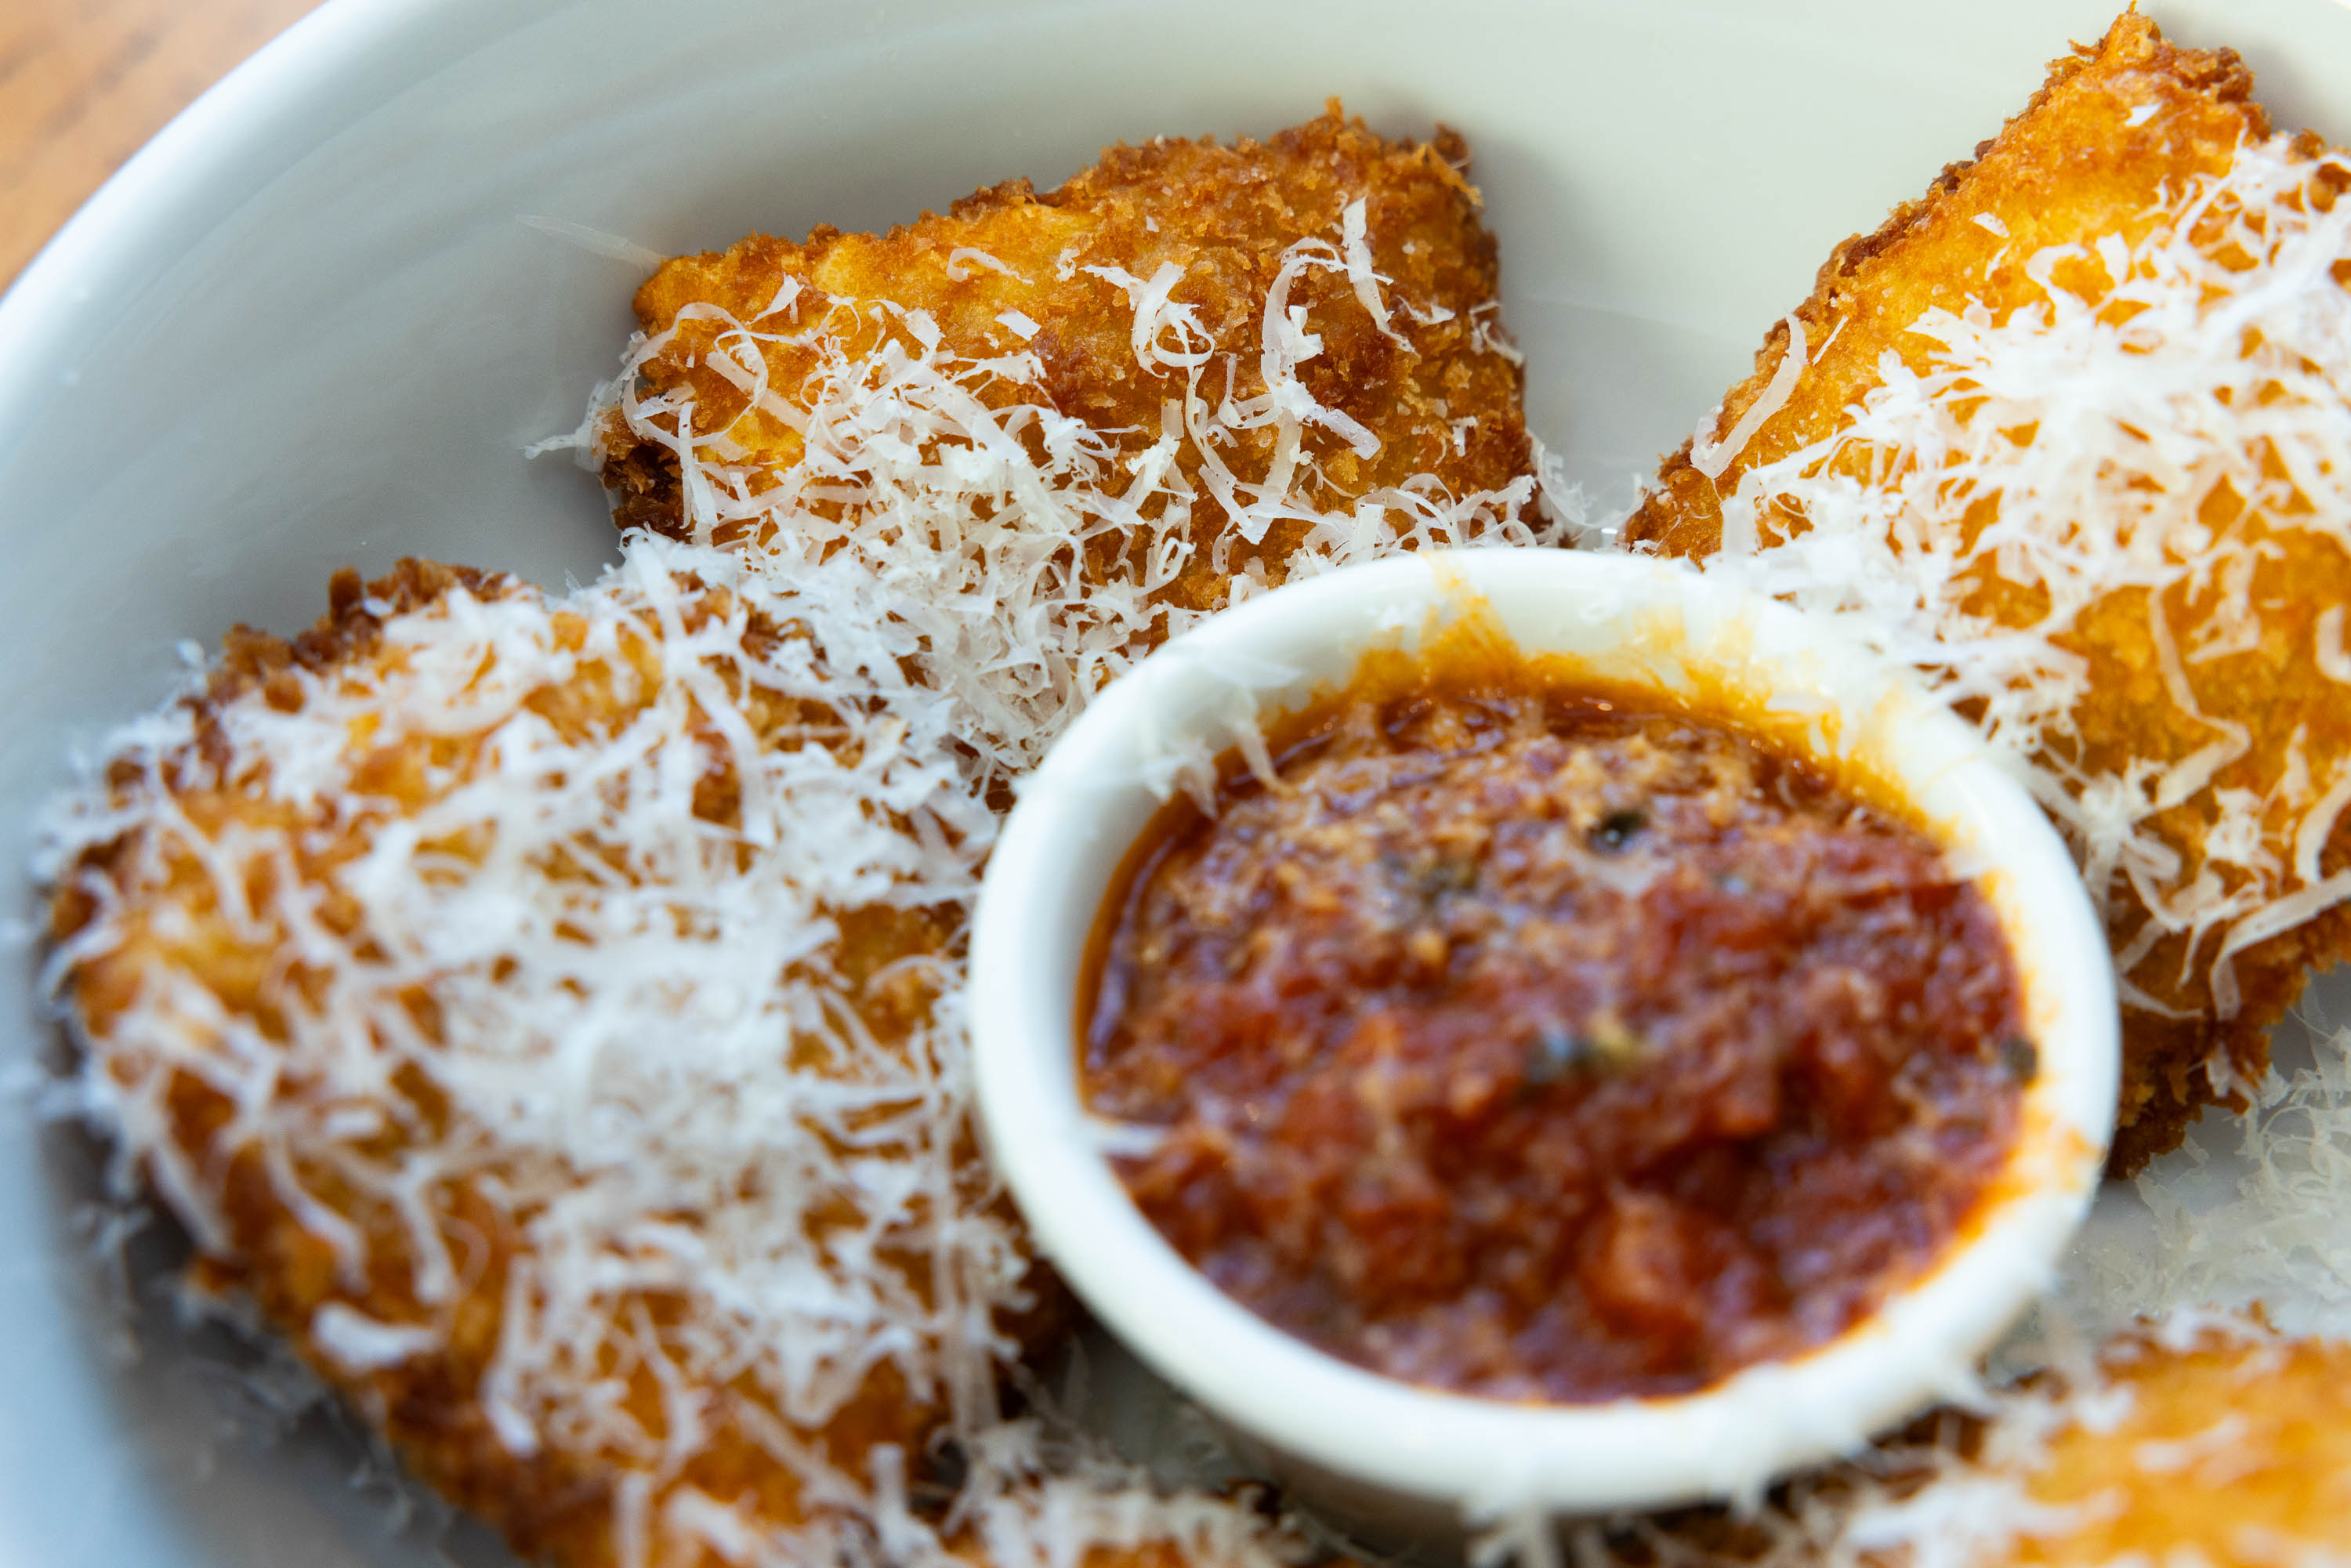 Fried ravioli topped with grated cheese served with marinara sauce in a white bowl.